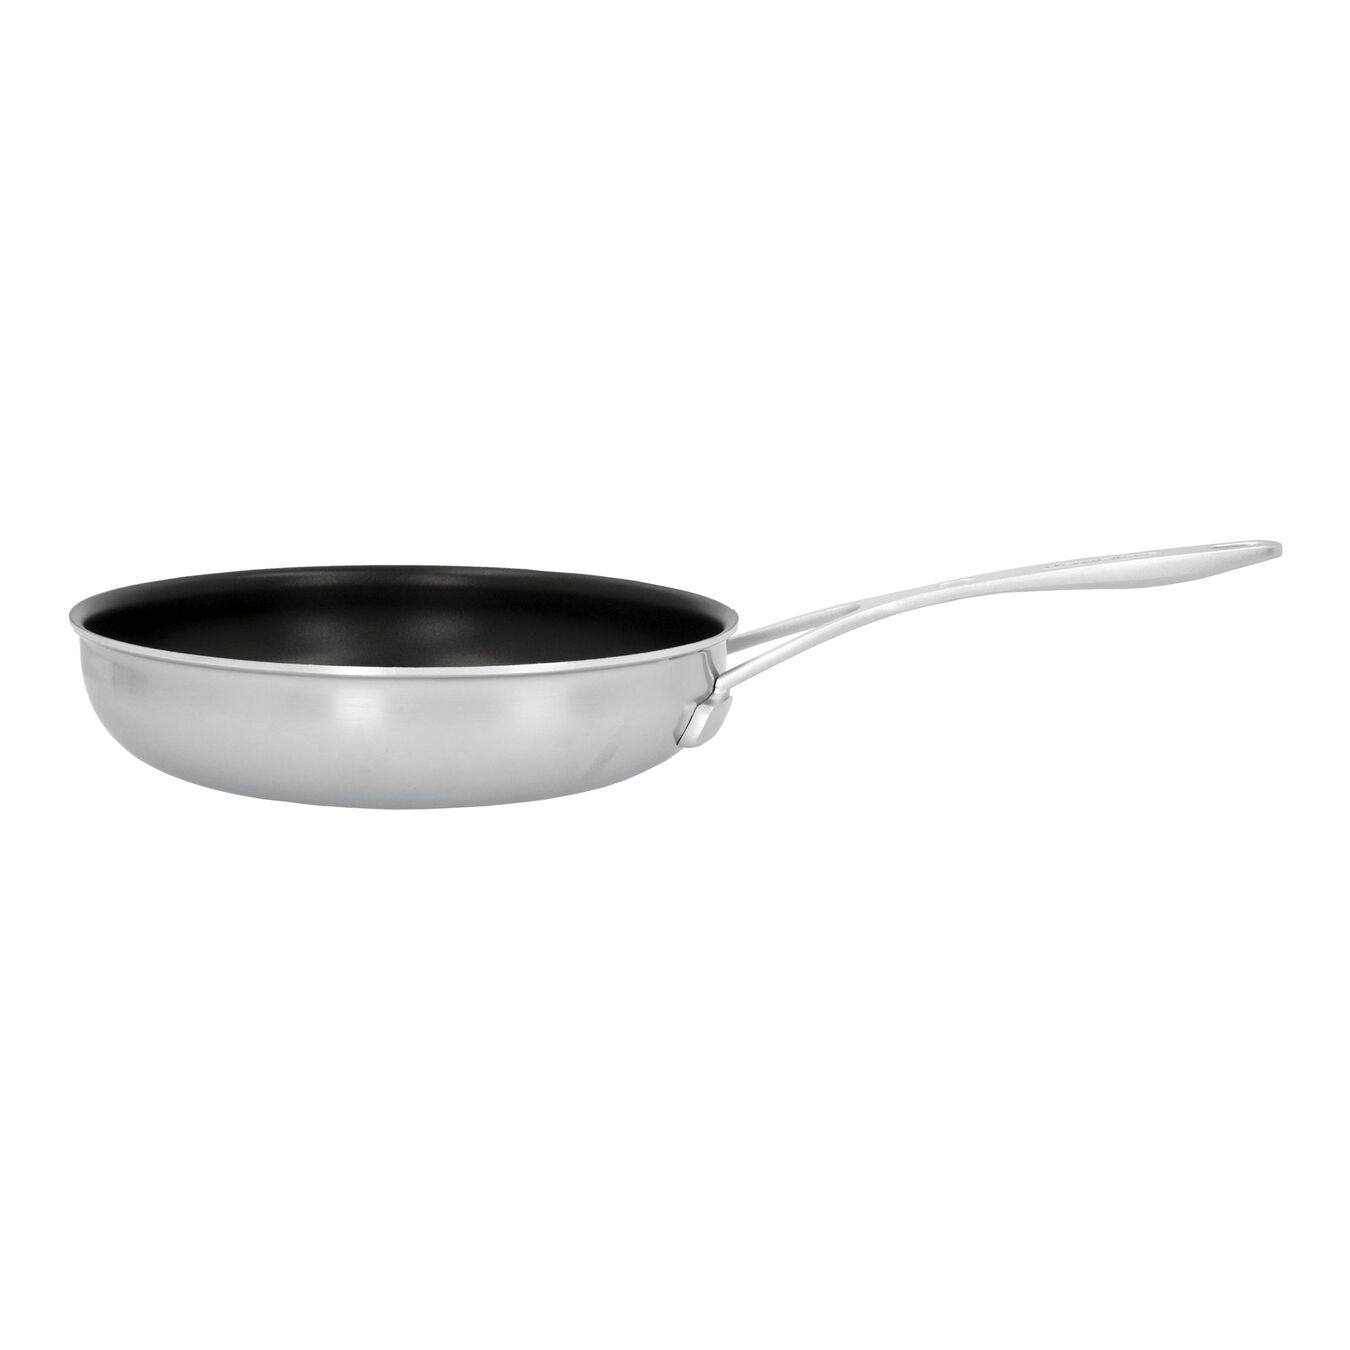 9.5-inch, 18/10 Stainless Steel, PTFE, Traditional Nonstick Fry Pan,,large 1